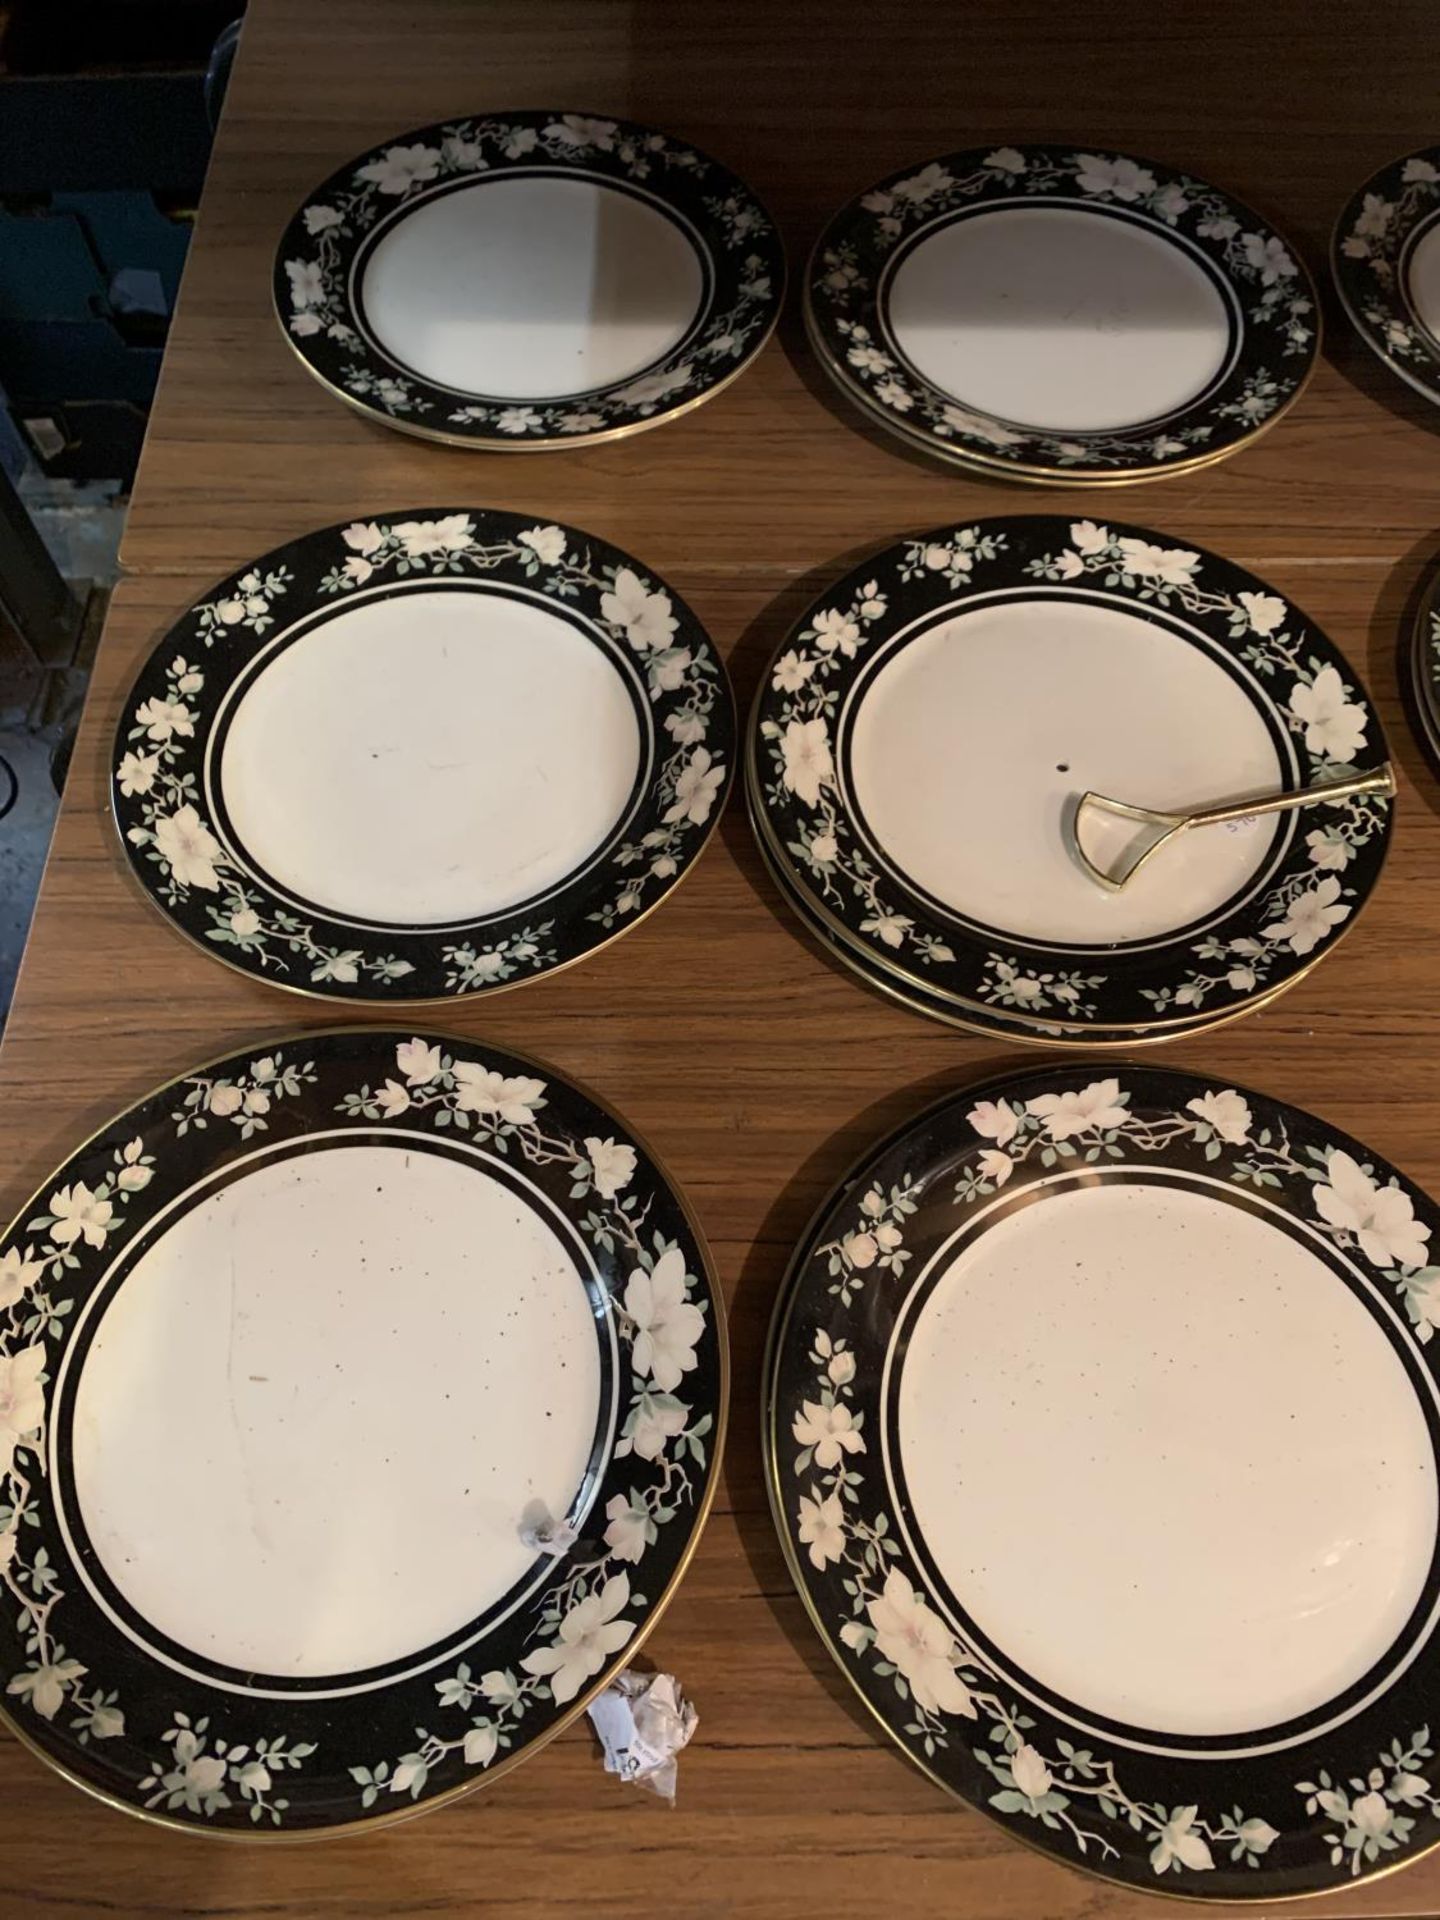 FIFTEEN ROYAL DOULTON VOGUE COLLECTION DINNER PLATES AND A THREE TIERED CAKE STAND - Image 6 of 6